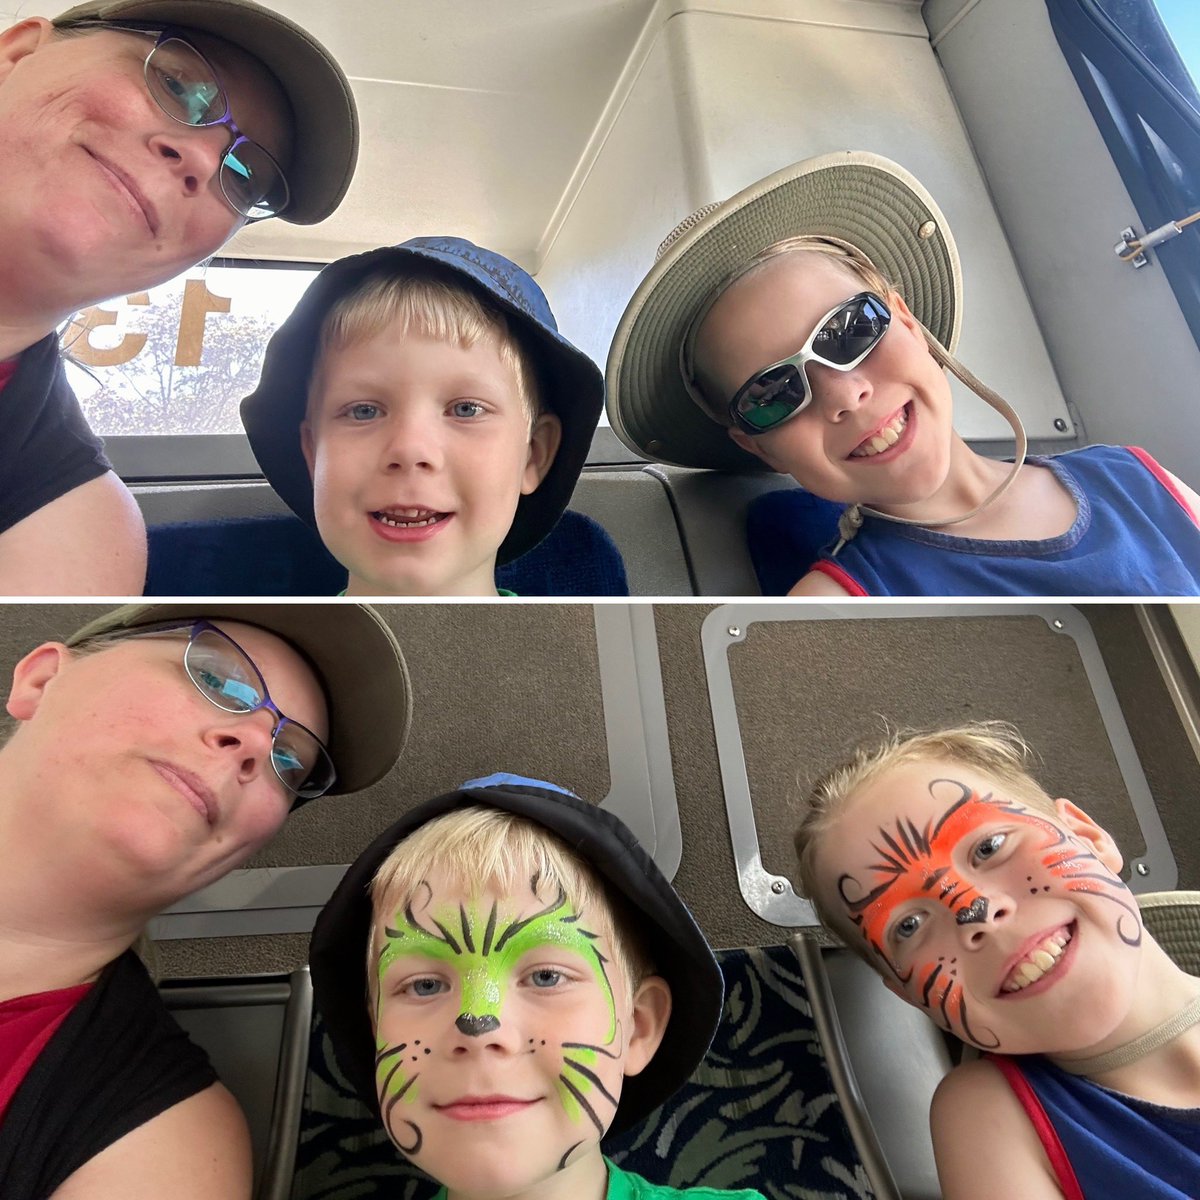 Start of the days adventures vs end of the day - spent on the waterfront enjoying the sun while we have it

#summer #vacation #halifaxwaterfront #busadventures #sun #facepainting #lifewithkids #halifax #novascotia